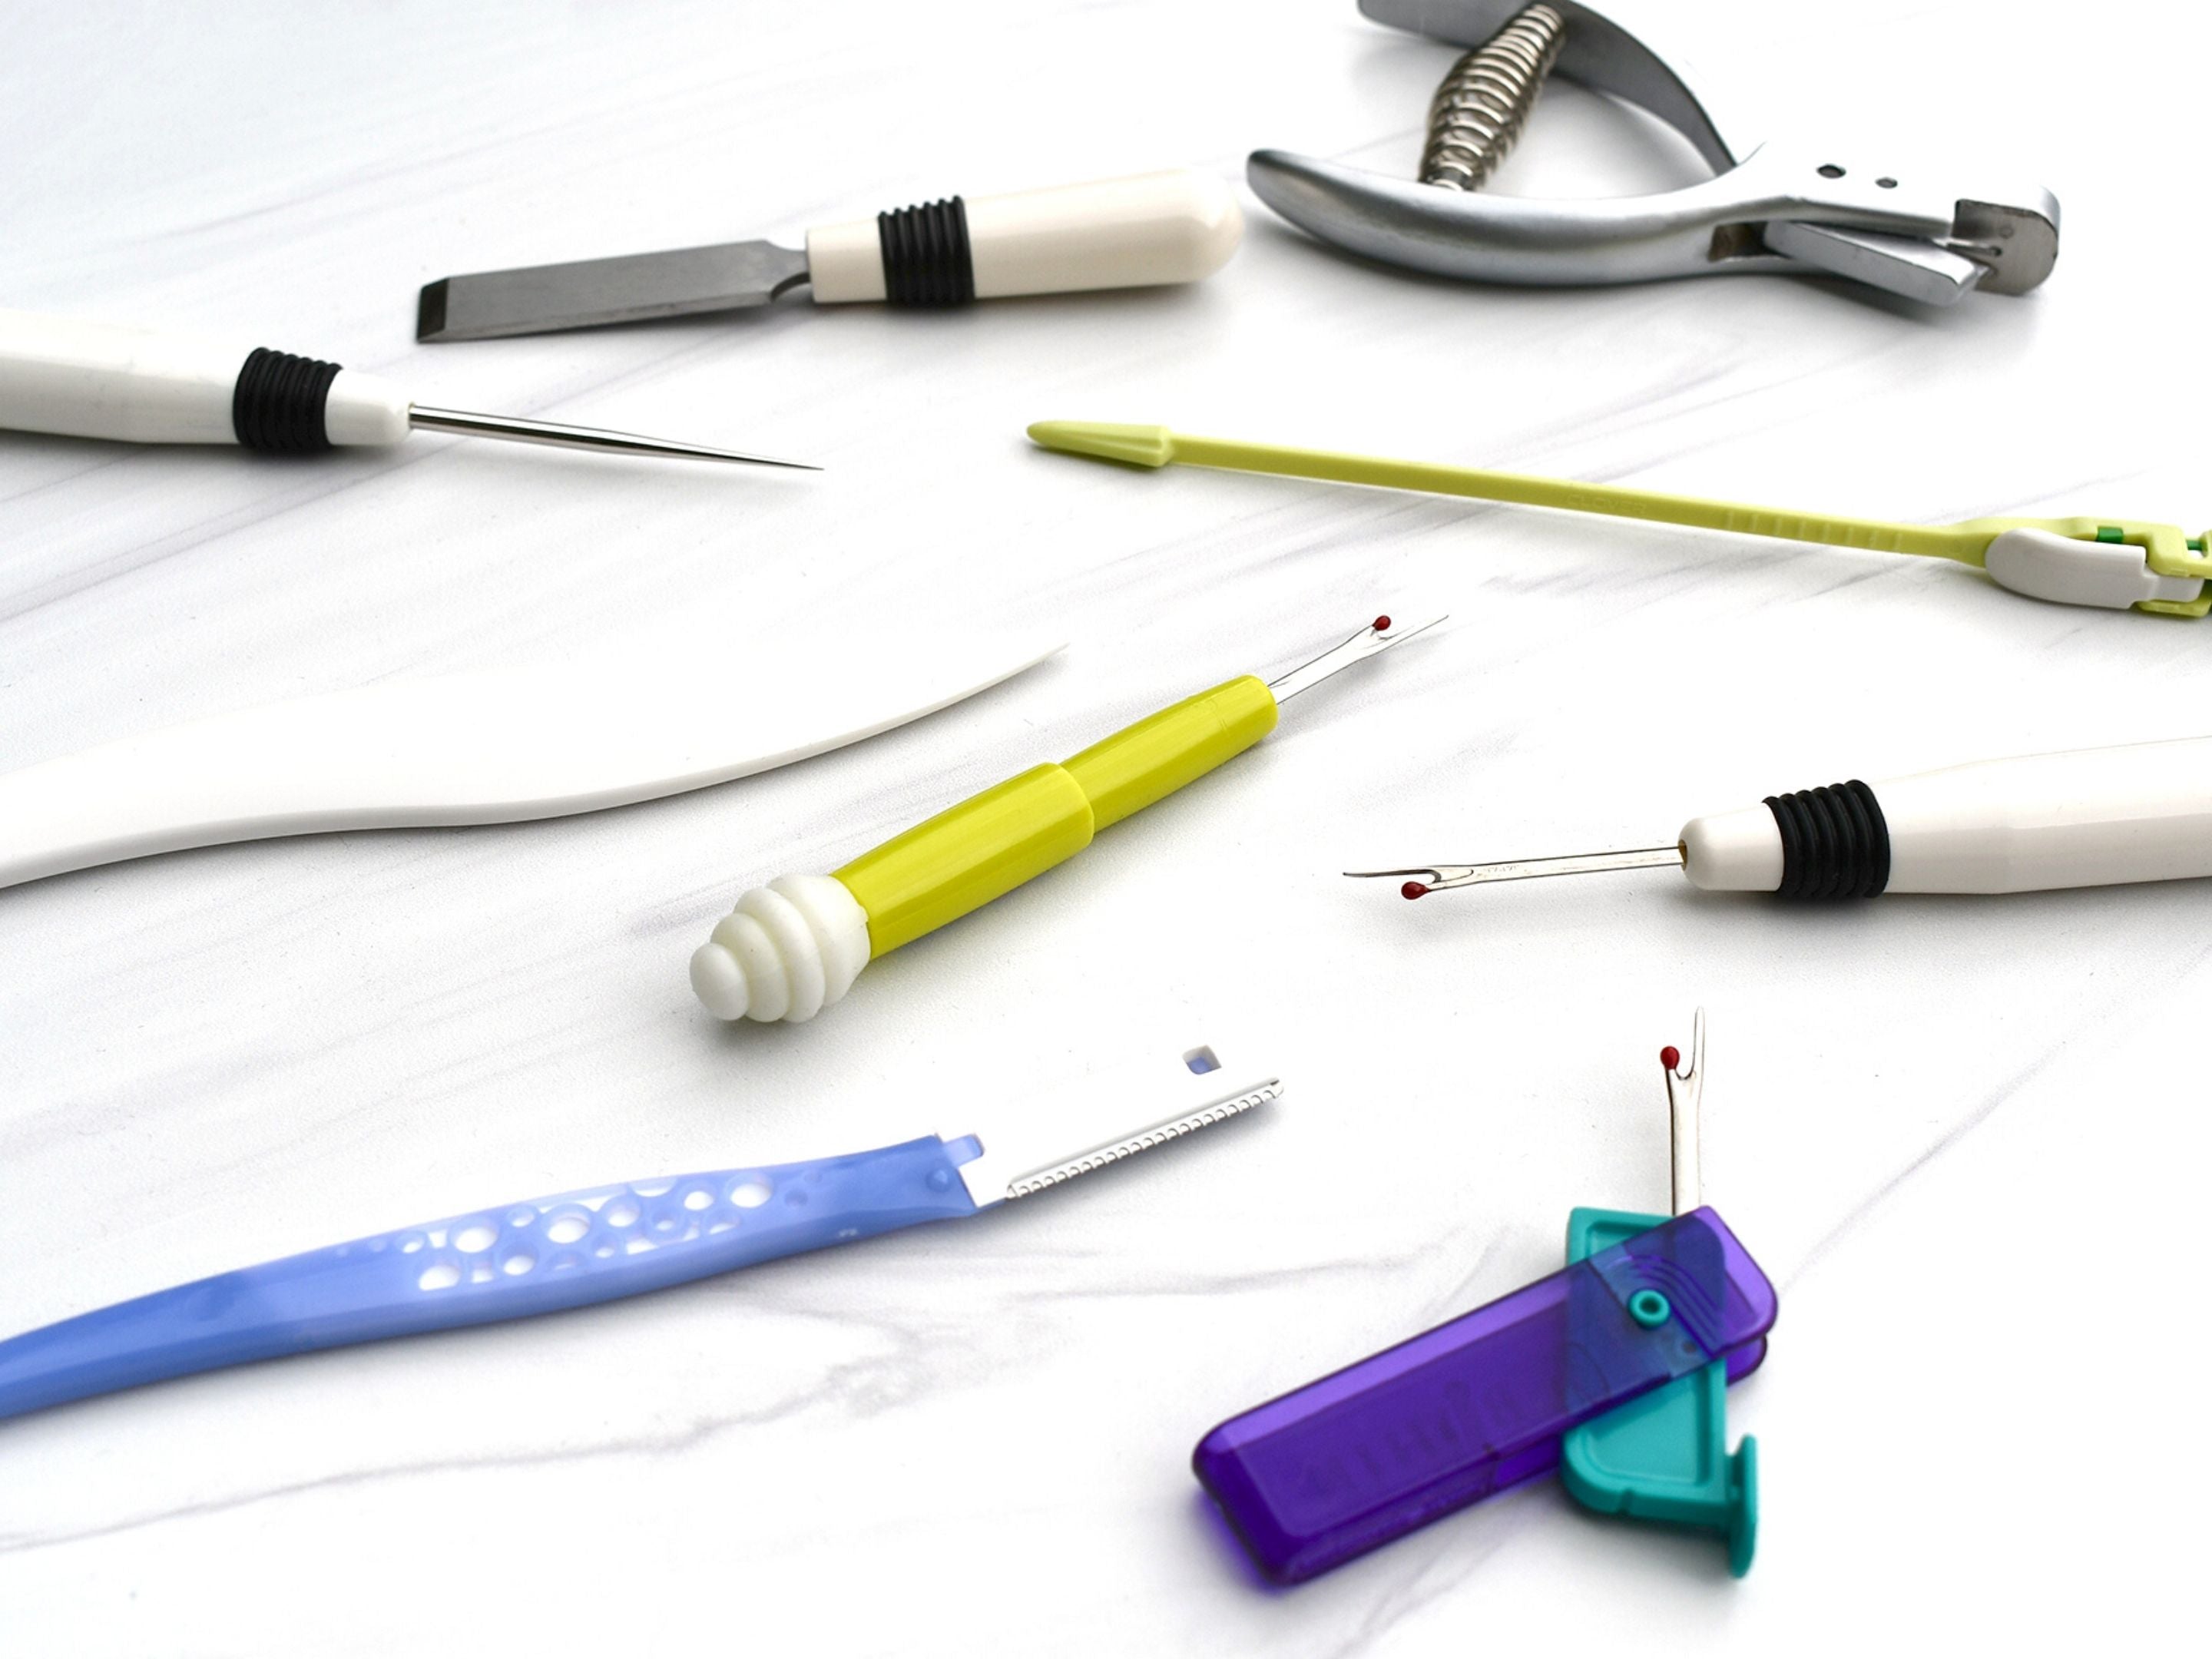 Various Seam Rippers and other Specialty Sewing Tools